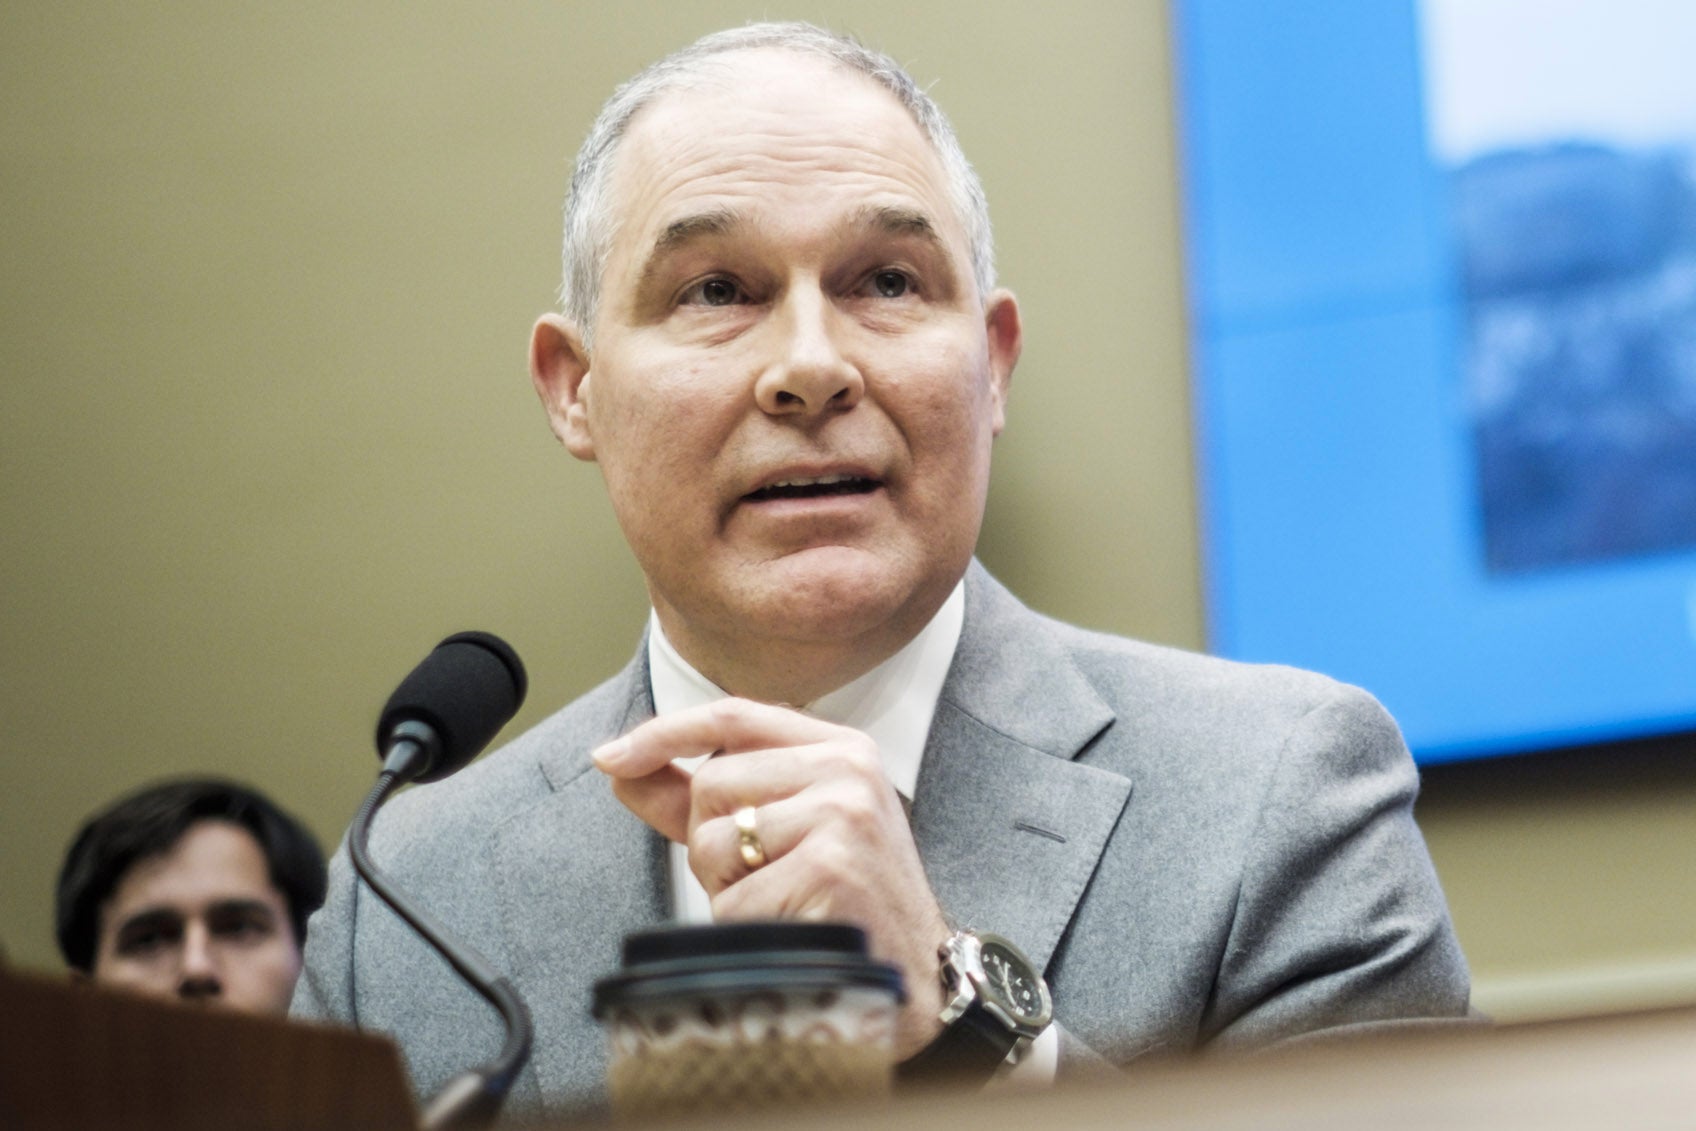 EPA Administrator Scott Pruitt testifies before the House Energy and Commerce Committee on Dec. 7 in Washington.